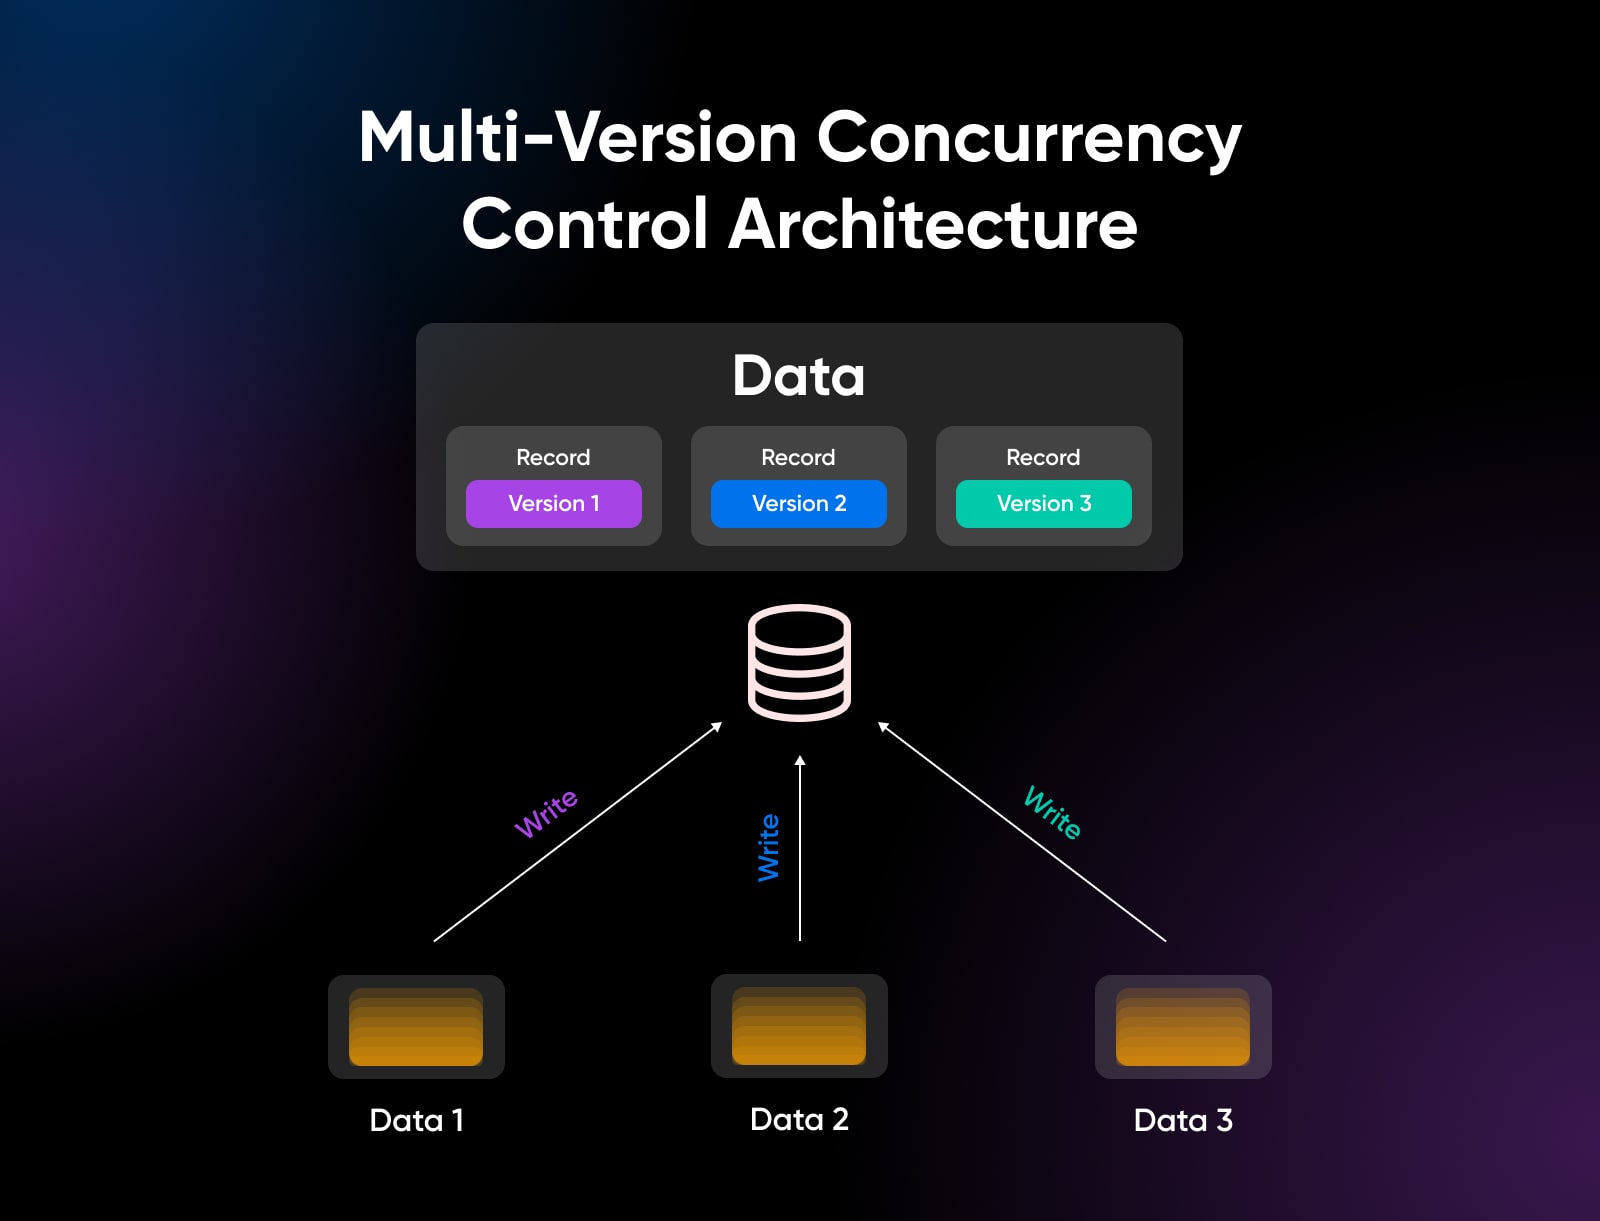 multi-version concurrency control architecture showing data from three different sets to write to 3 versions of data records